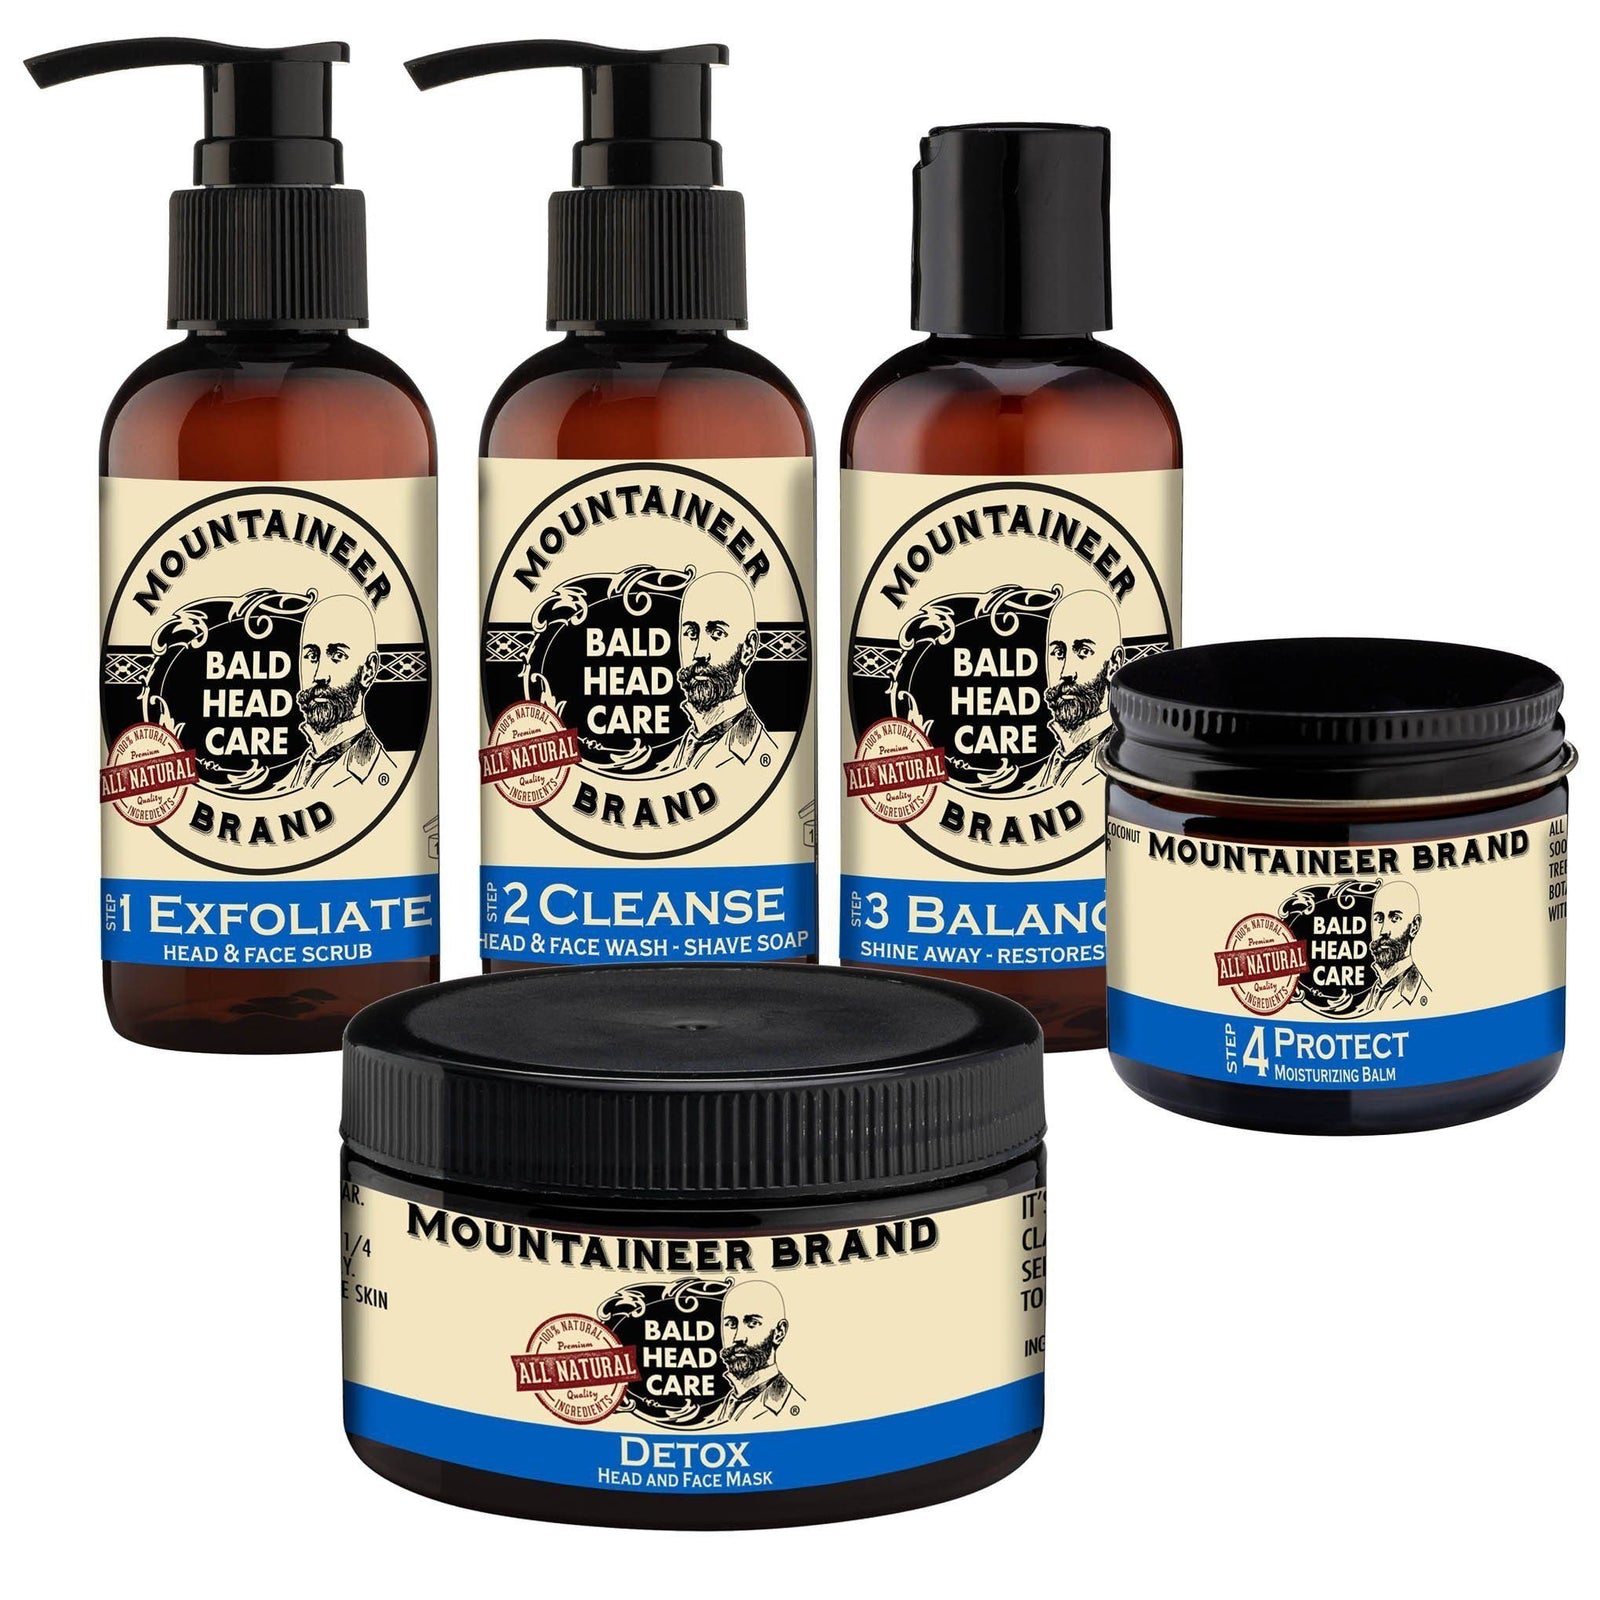 Mountaineer Brand-Bald Head Care 101 - Properly Caring For and Embracing the BALD